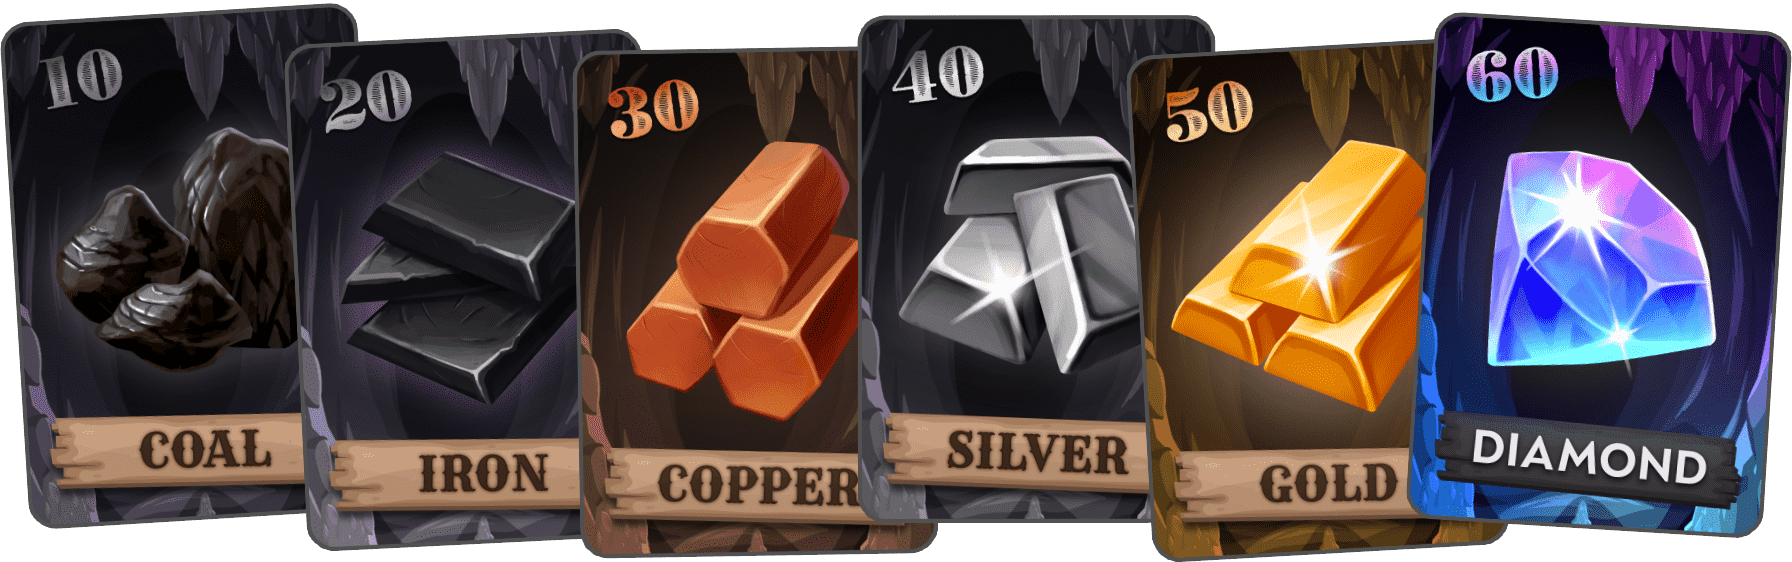 Coal, iron, copper, silver, gold, and diamond cards